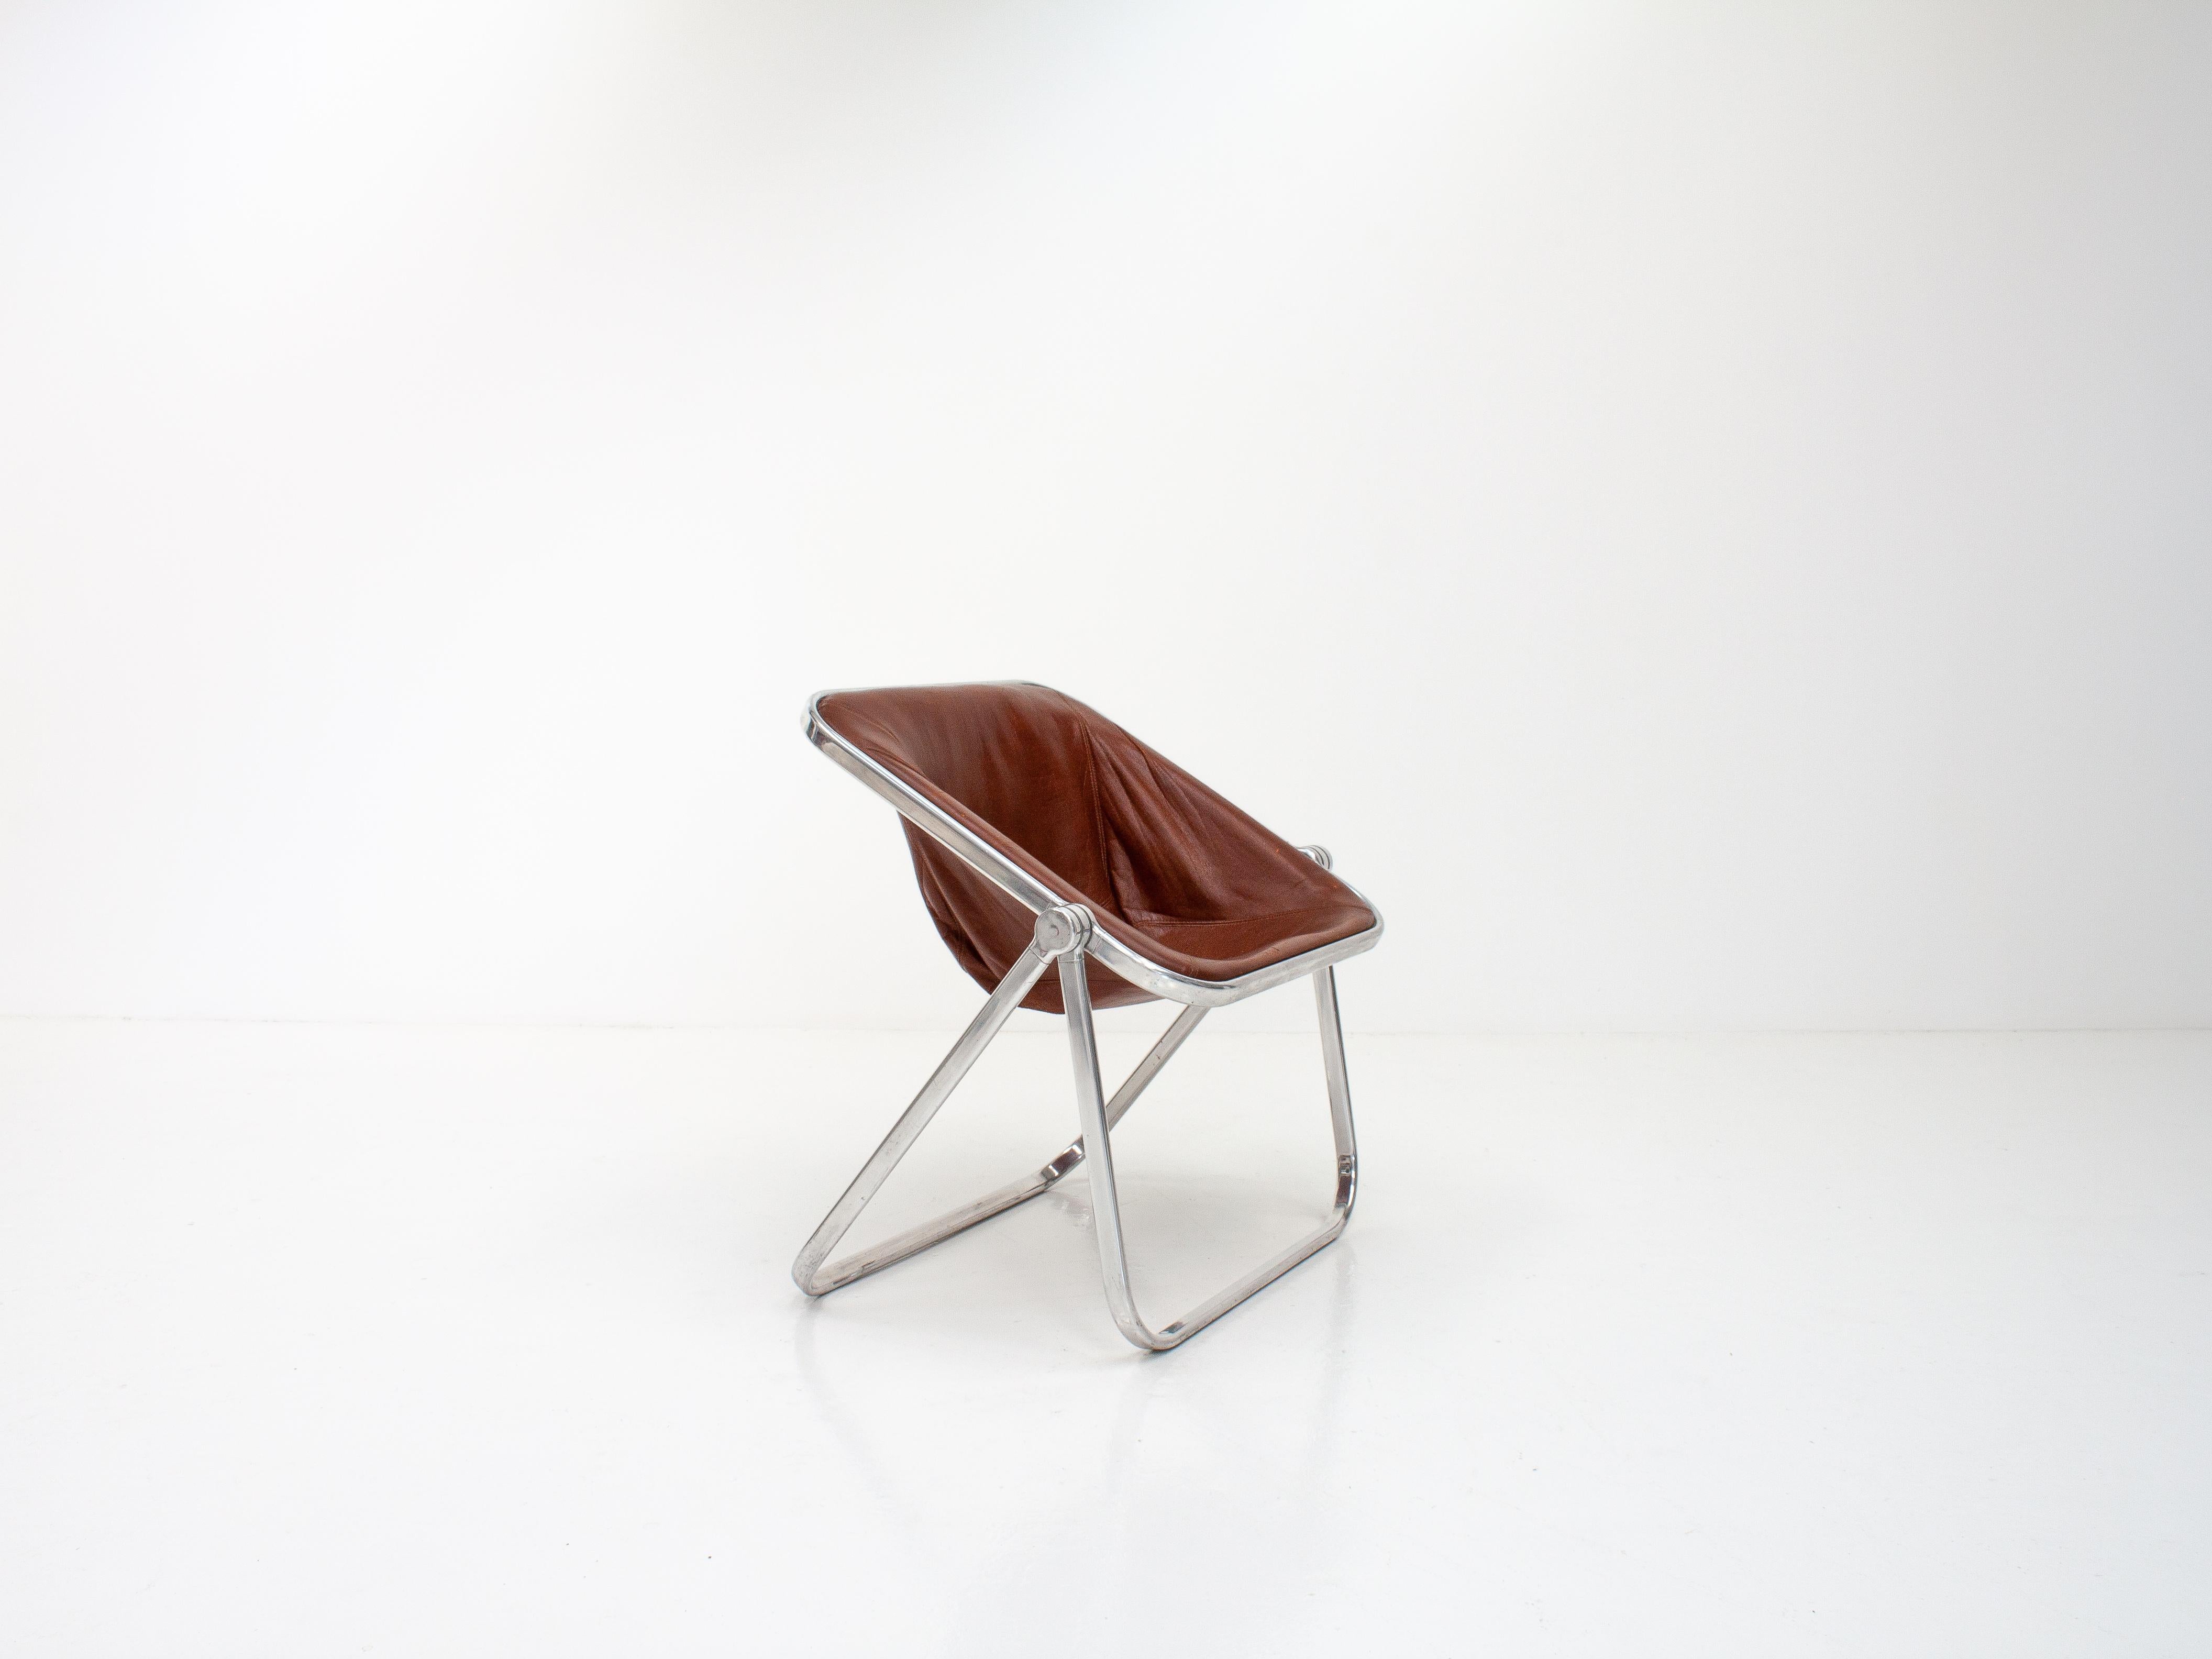 Mid-Century Modern Plona Folding Lounge Chair by Giancarlo Piretti for Castelli in 1969, Italy